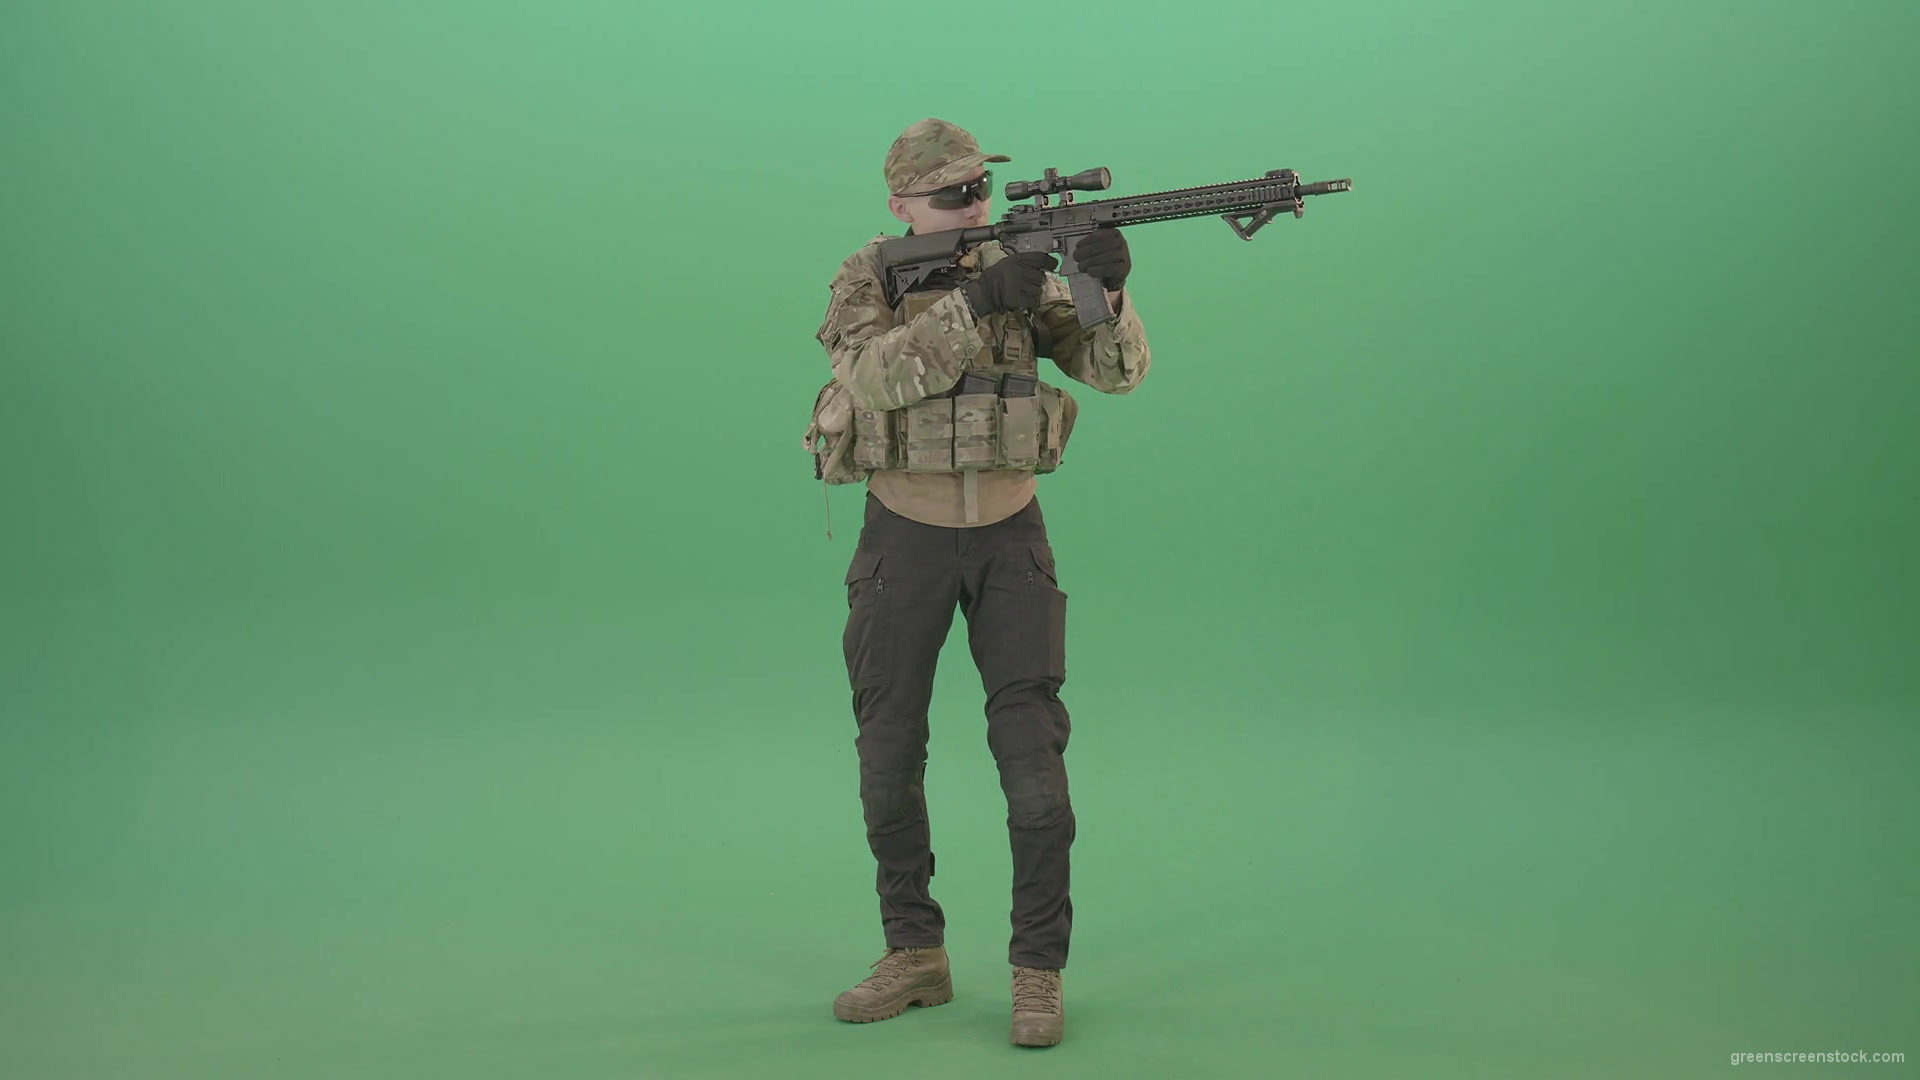 Counter-strike-army-police-man-shooting-enemy-from-machine-gun-in-Camouflage-uniform-on-green-screen-4K-Video-Footage-1920_008 Green Screen Stock